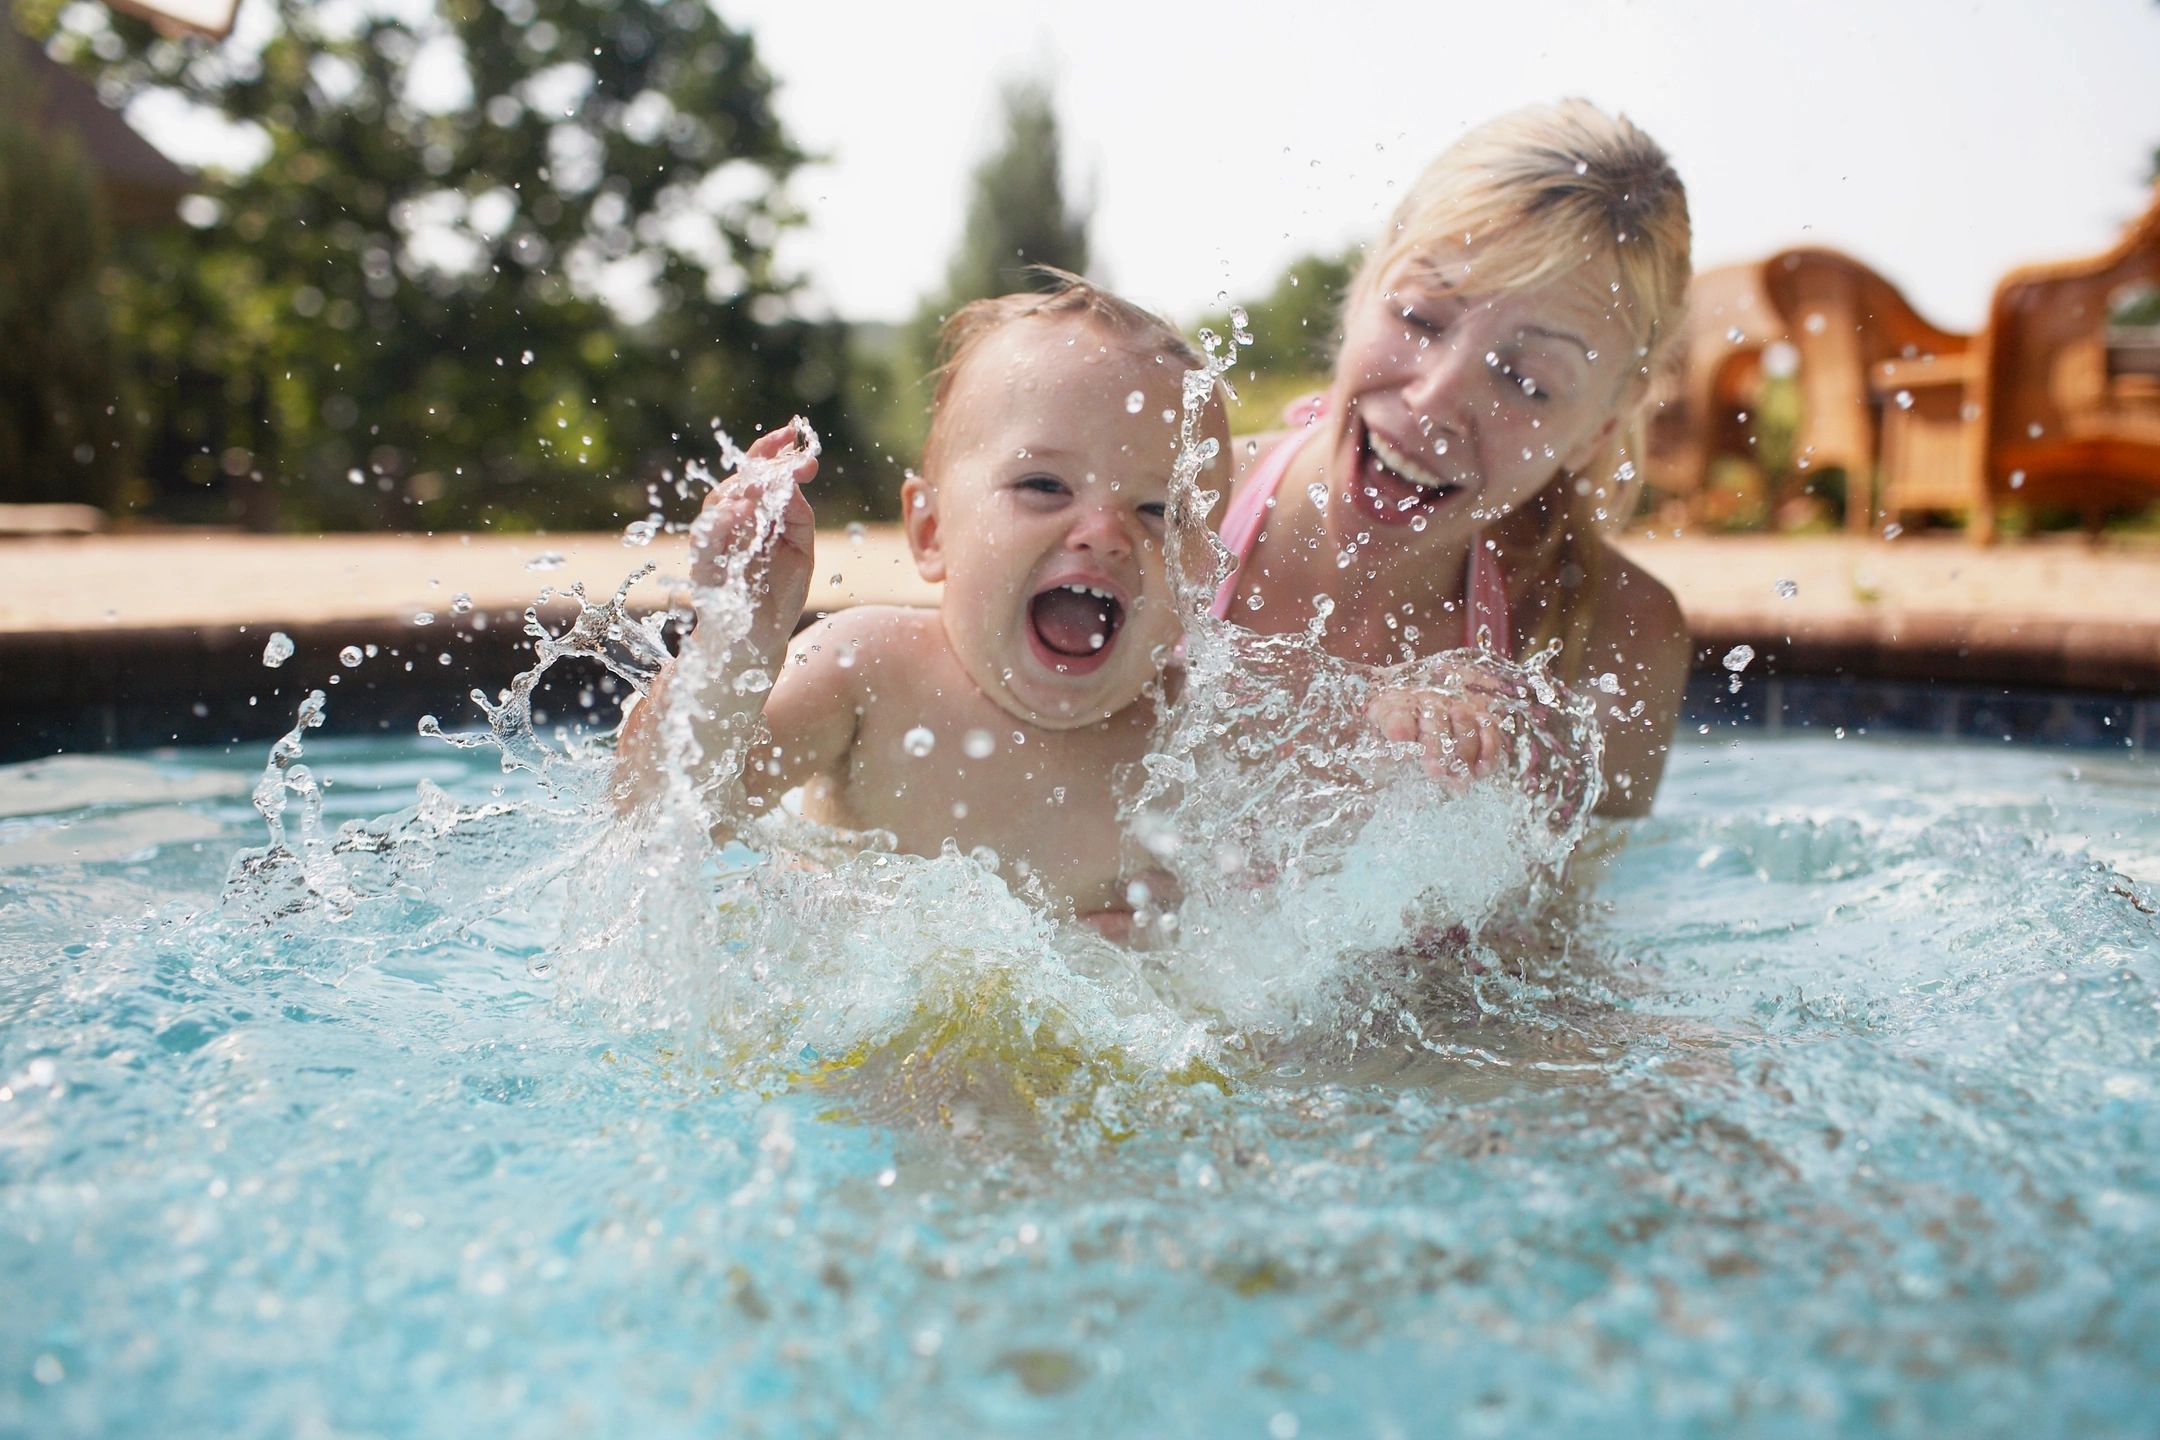 Nanny safely teaching child how to swim